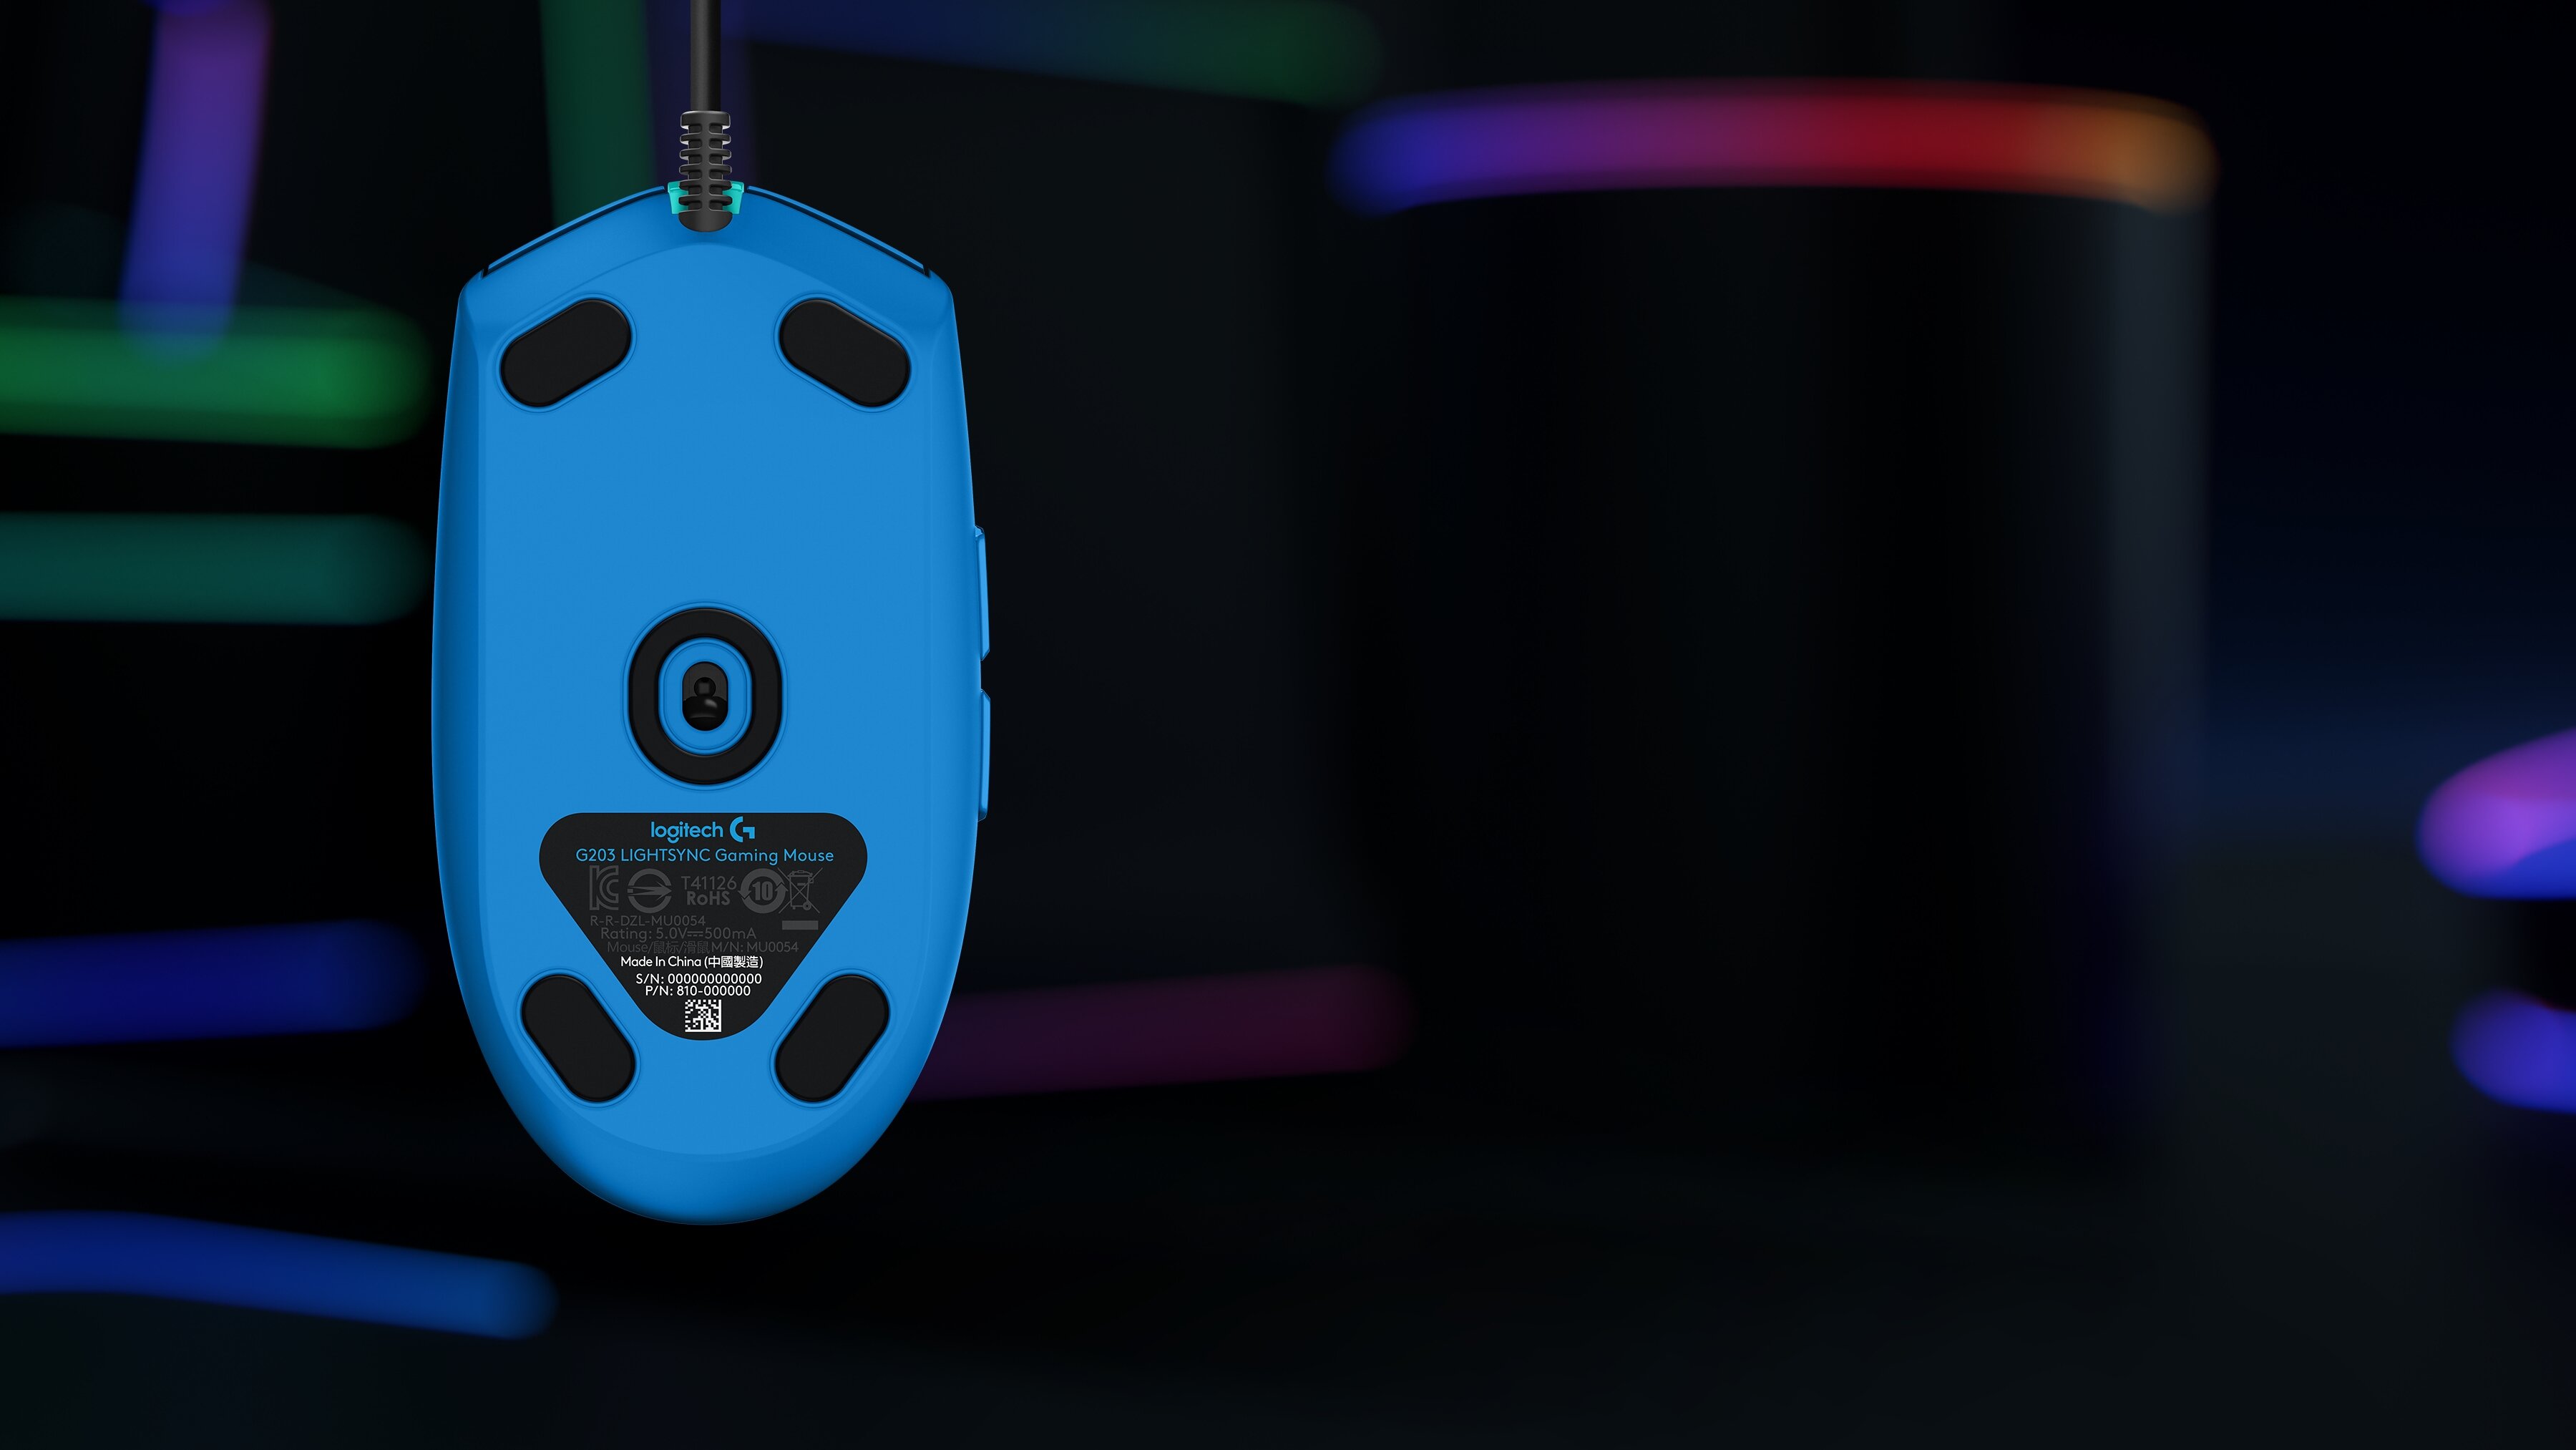 Logitech G203 LIGHTSYNC Wired Gaming Mouse